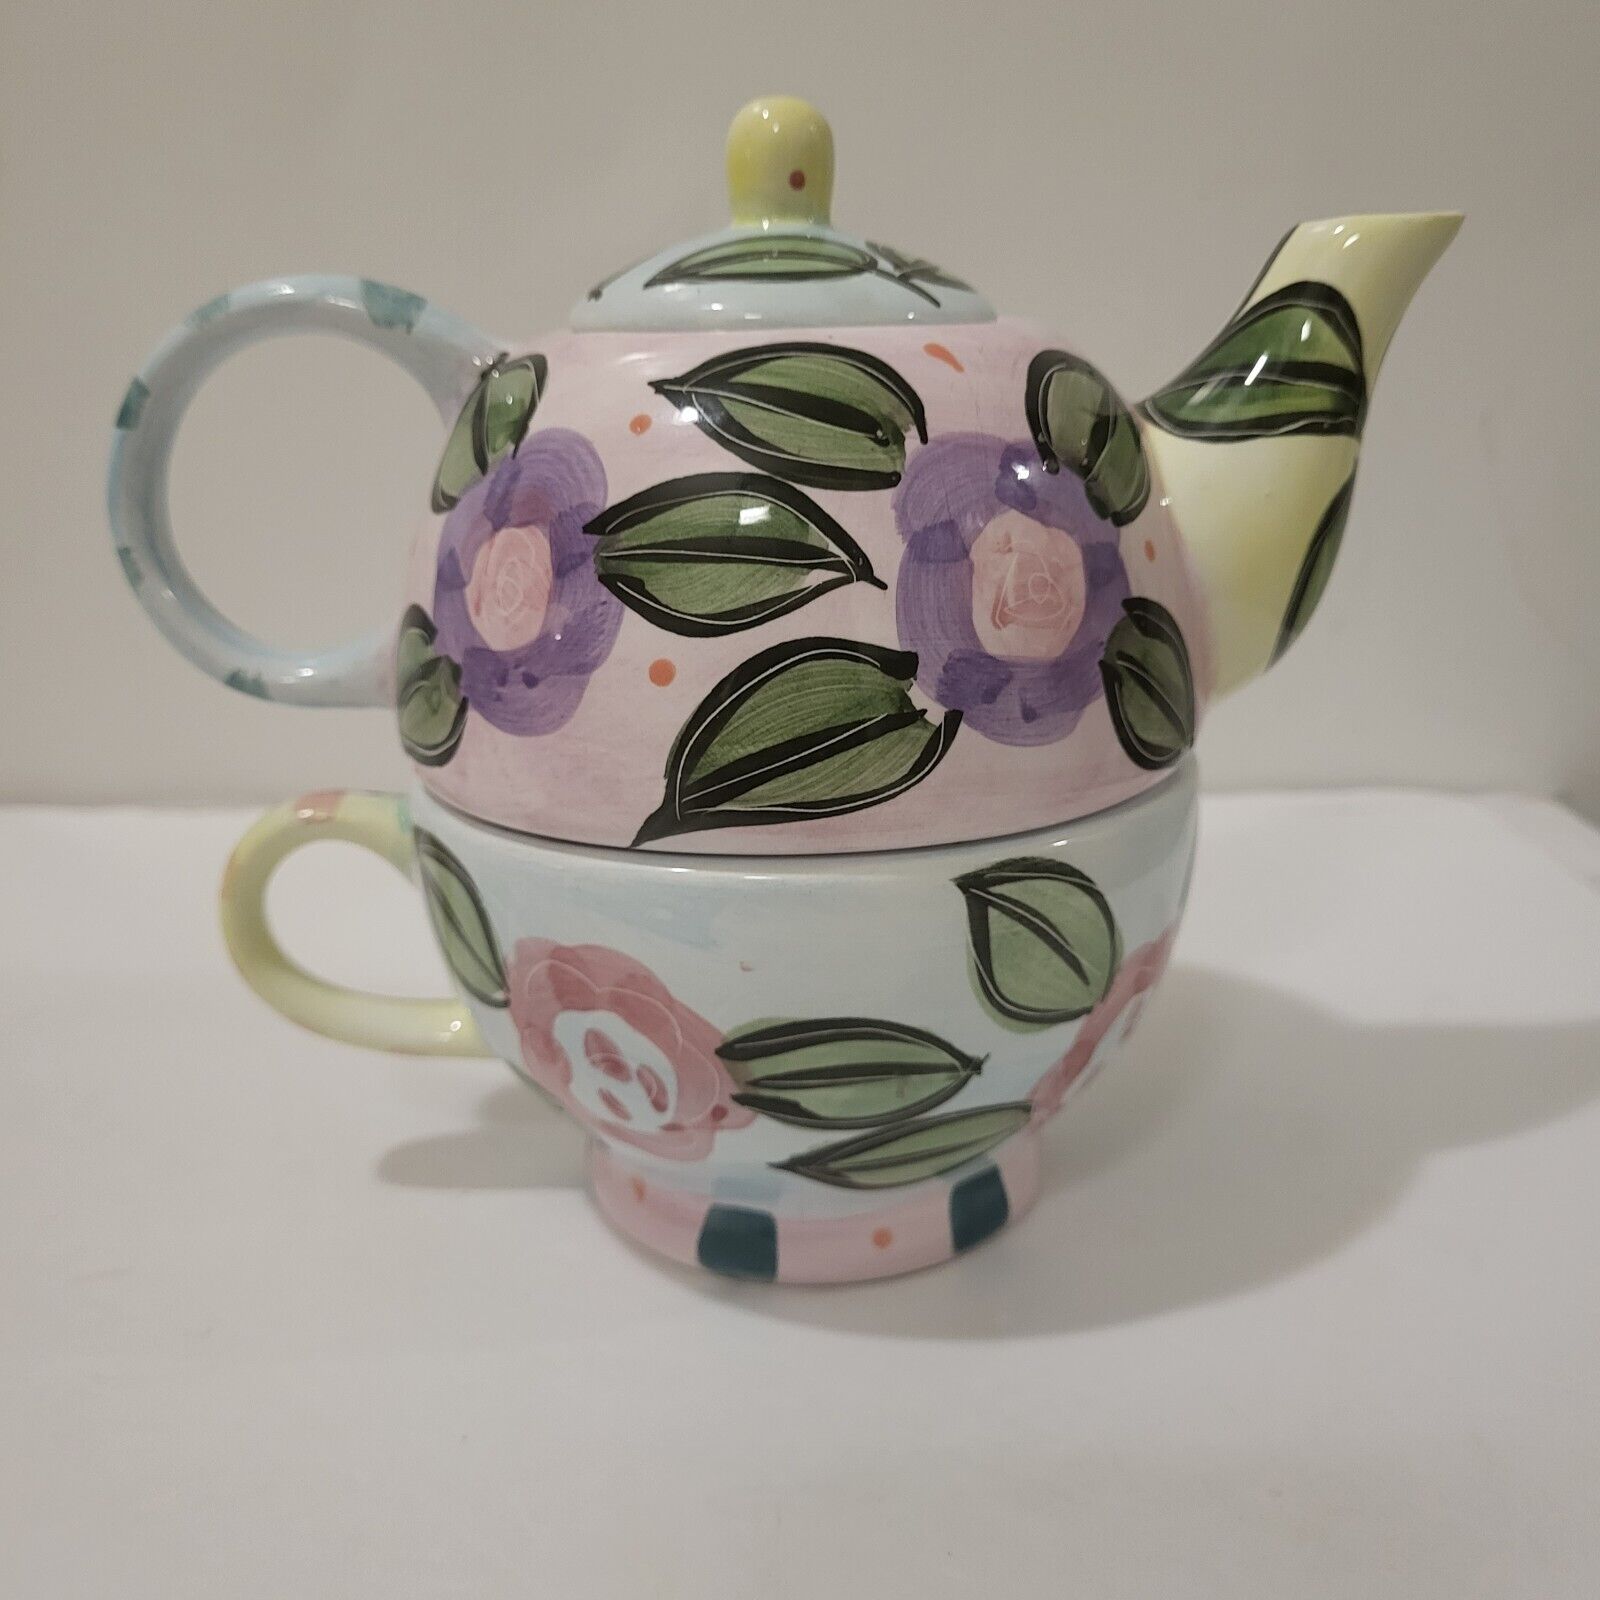 Vintage Floral Teapot With Cup For One